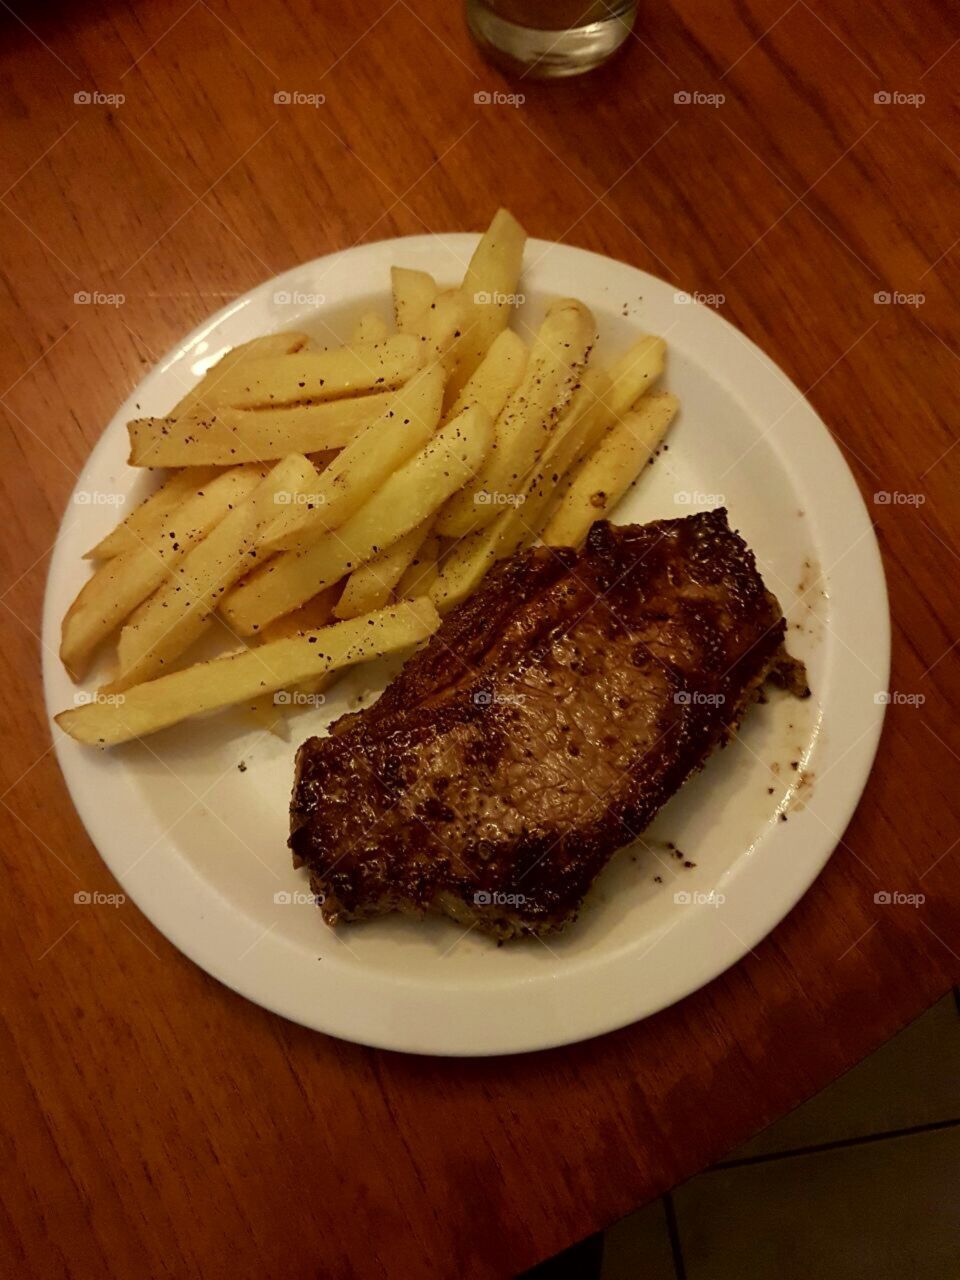 A staple diet of steak and potato chips. Greasy but good :)